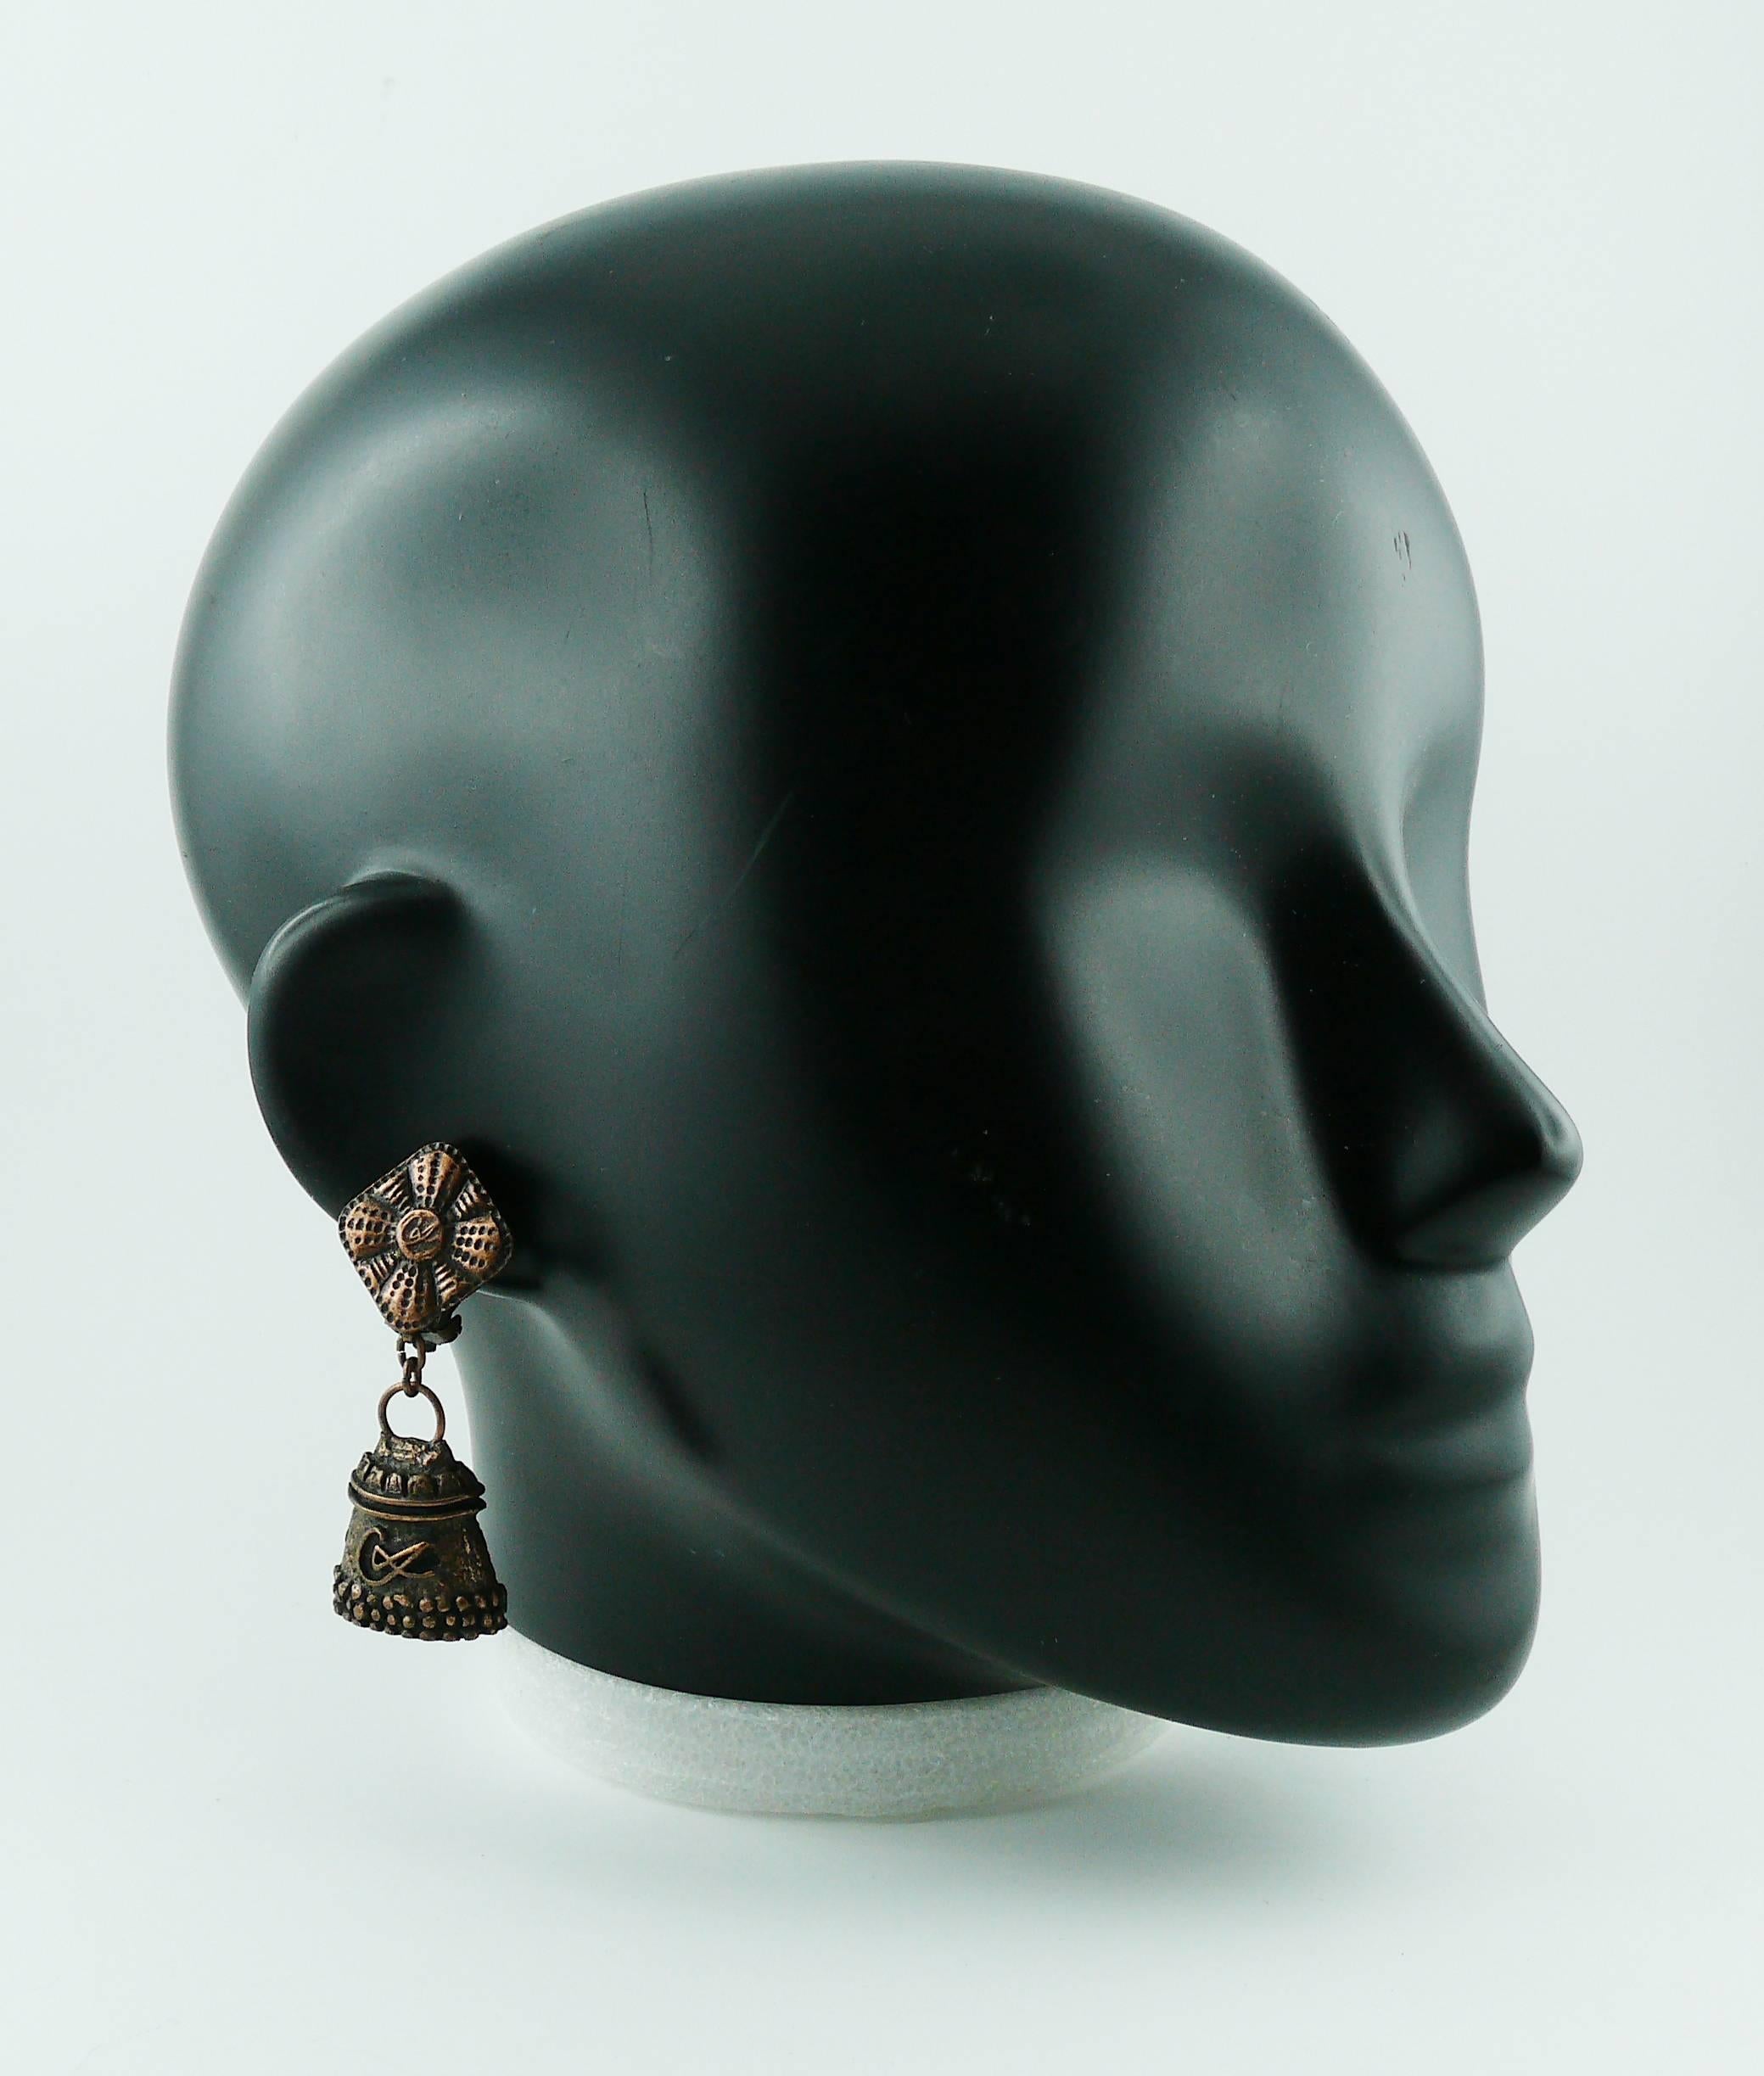 CHRISTIAN LACROIX vintage copper toned with antique patina thimble dangling earrings (clip-on) featuring CL monogram.

Marked CHRISTIAN LACROIX CL Made in France.

Indicative measurements : height approx. 5.7 cm (2.24 inches) / max. width approx.